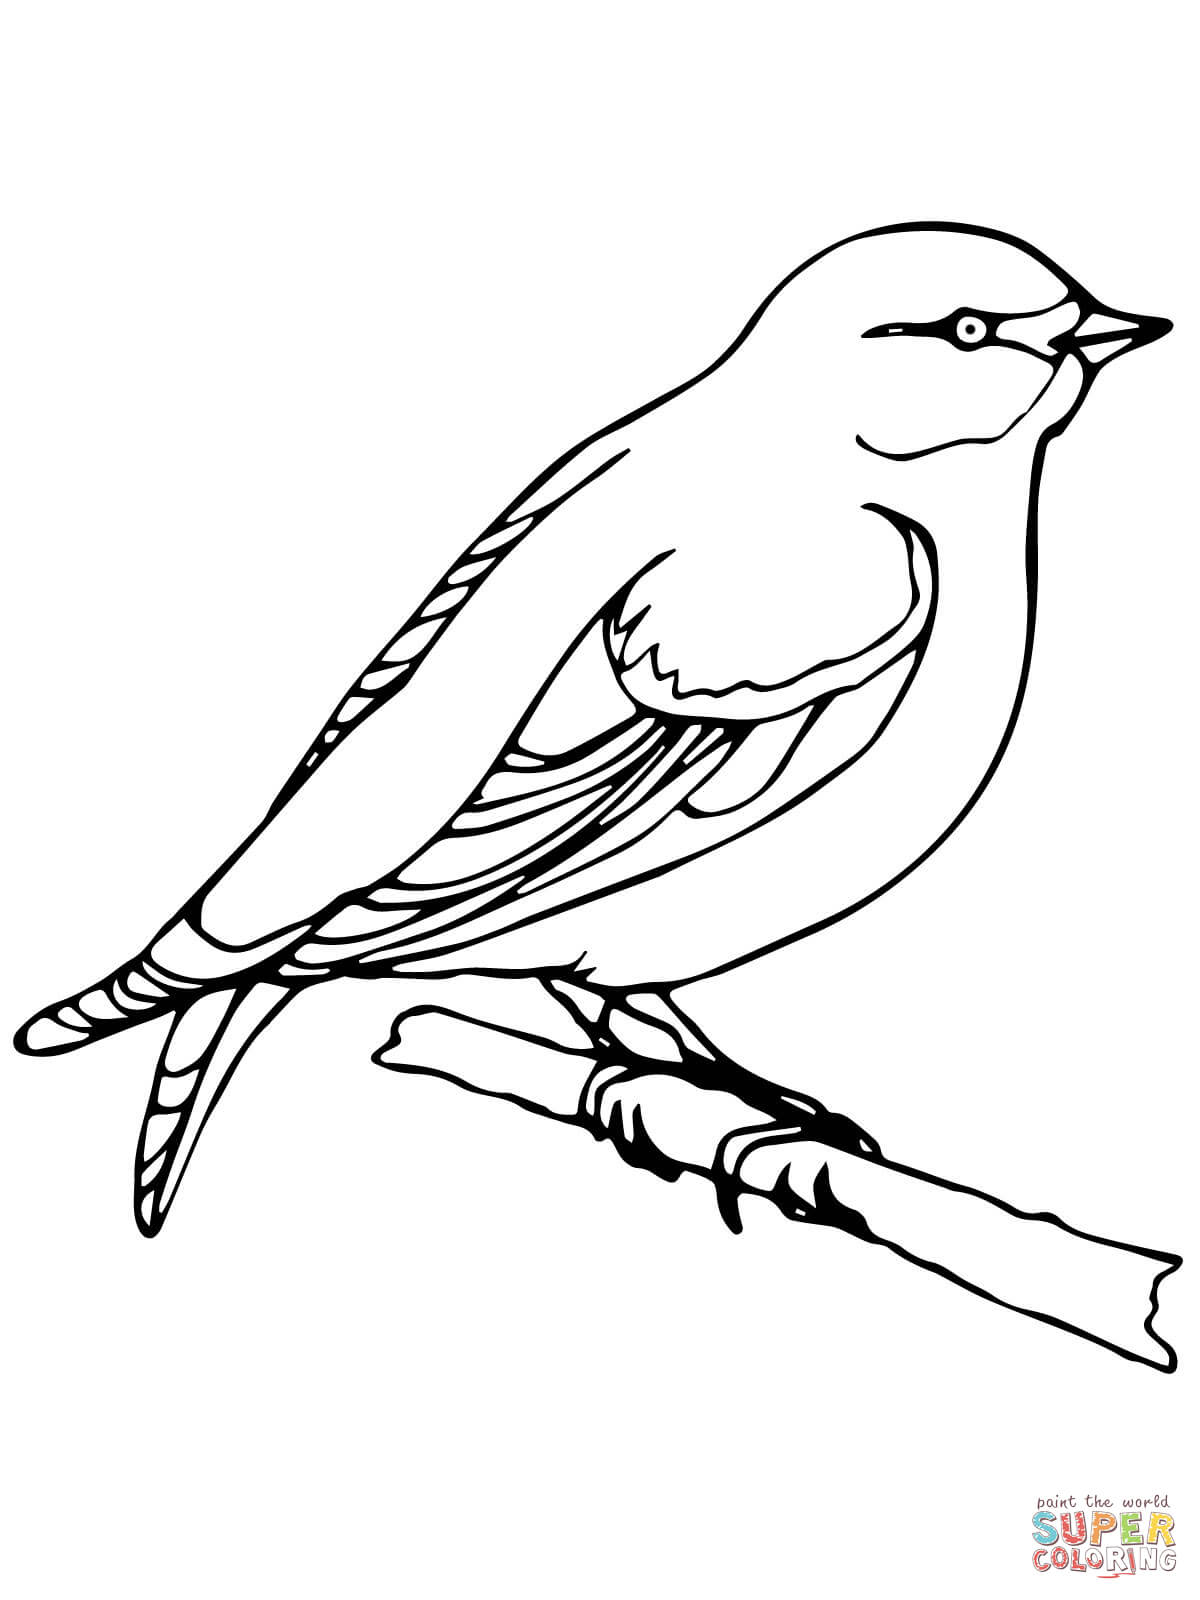 Carolina Wren Coloring Page Wren Coloring Page Free Printable Coloring Pages